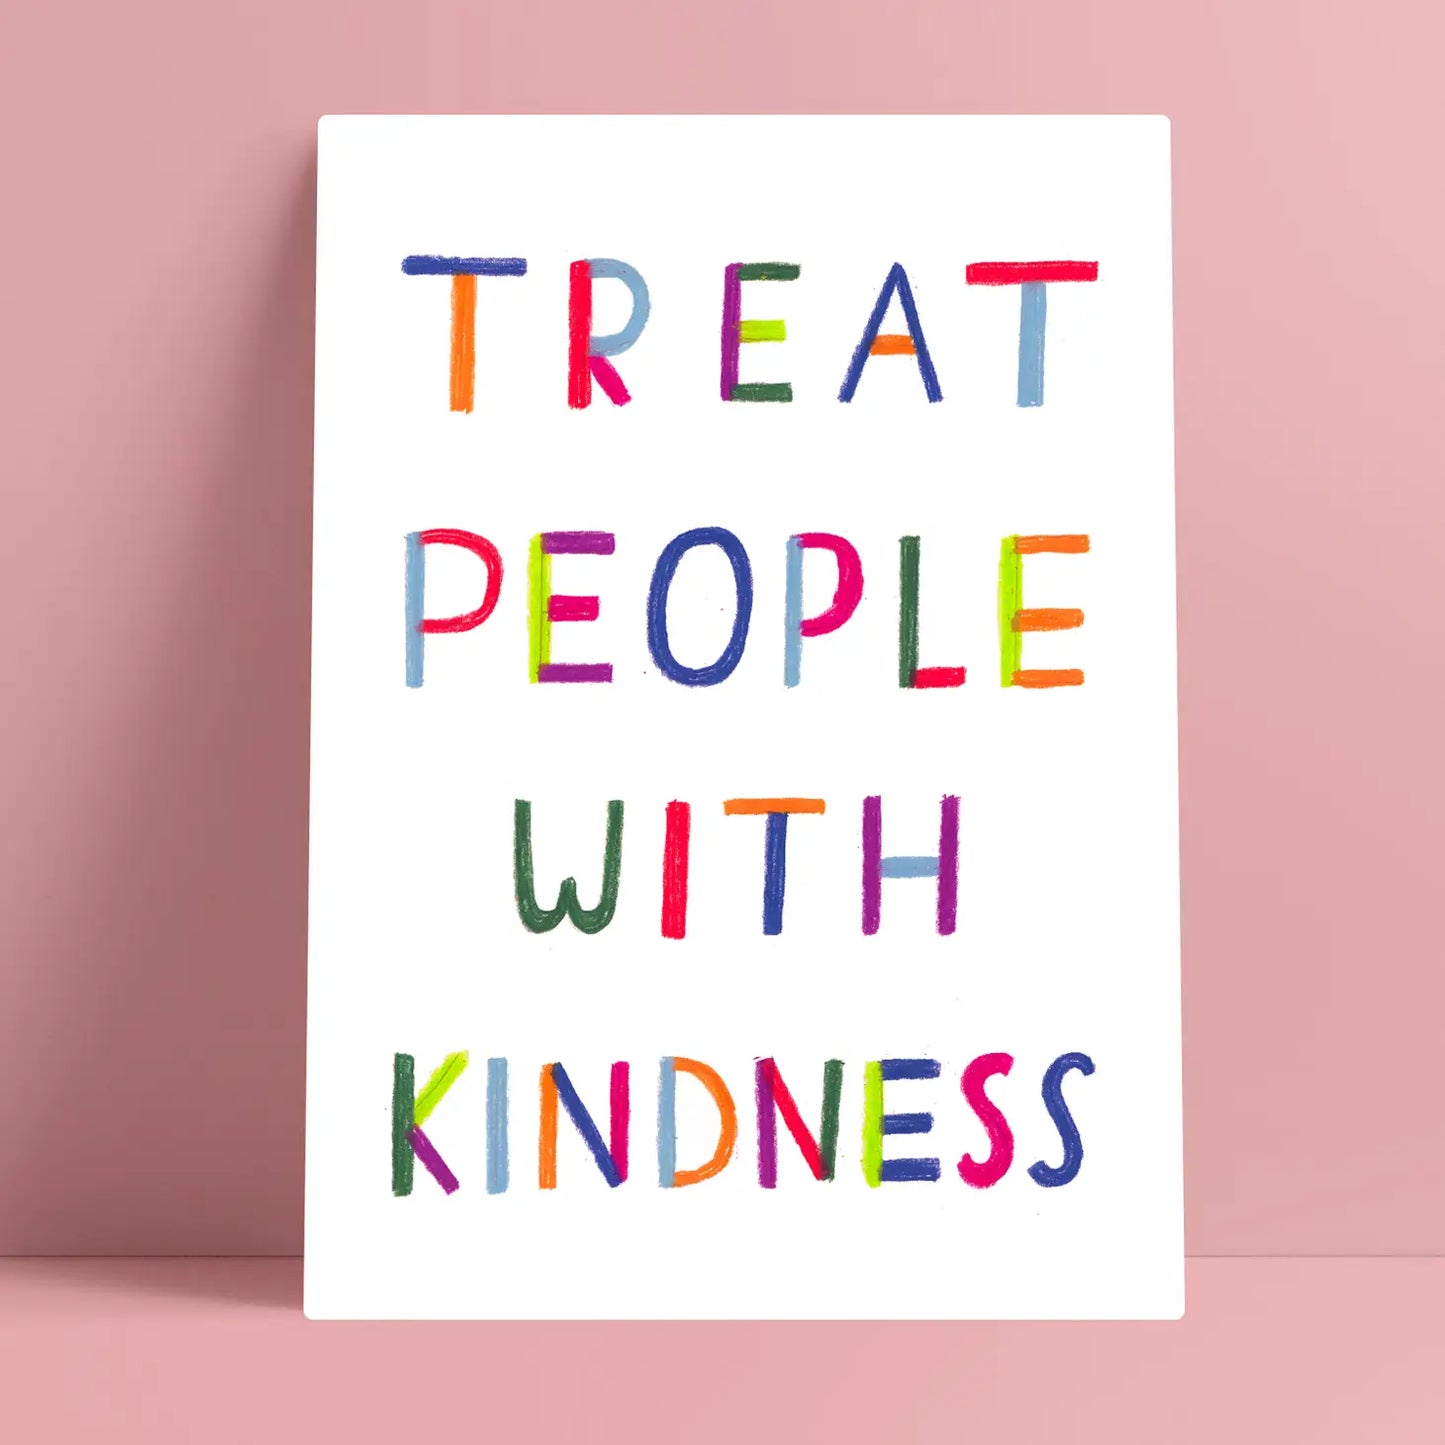 Treat people with kindness A4 print